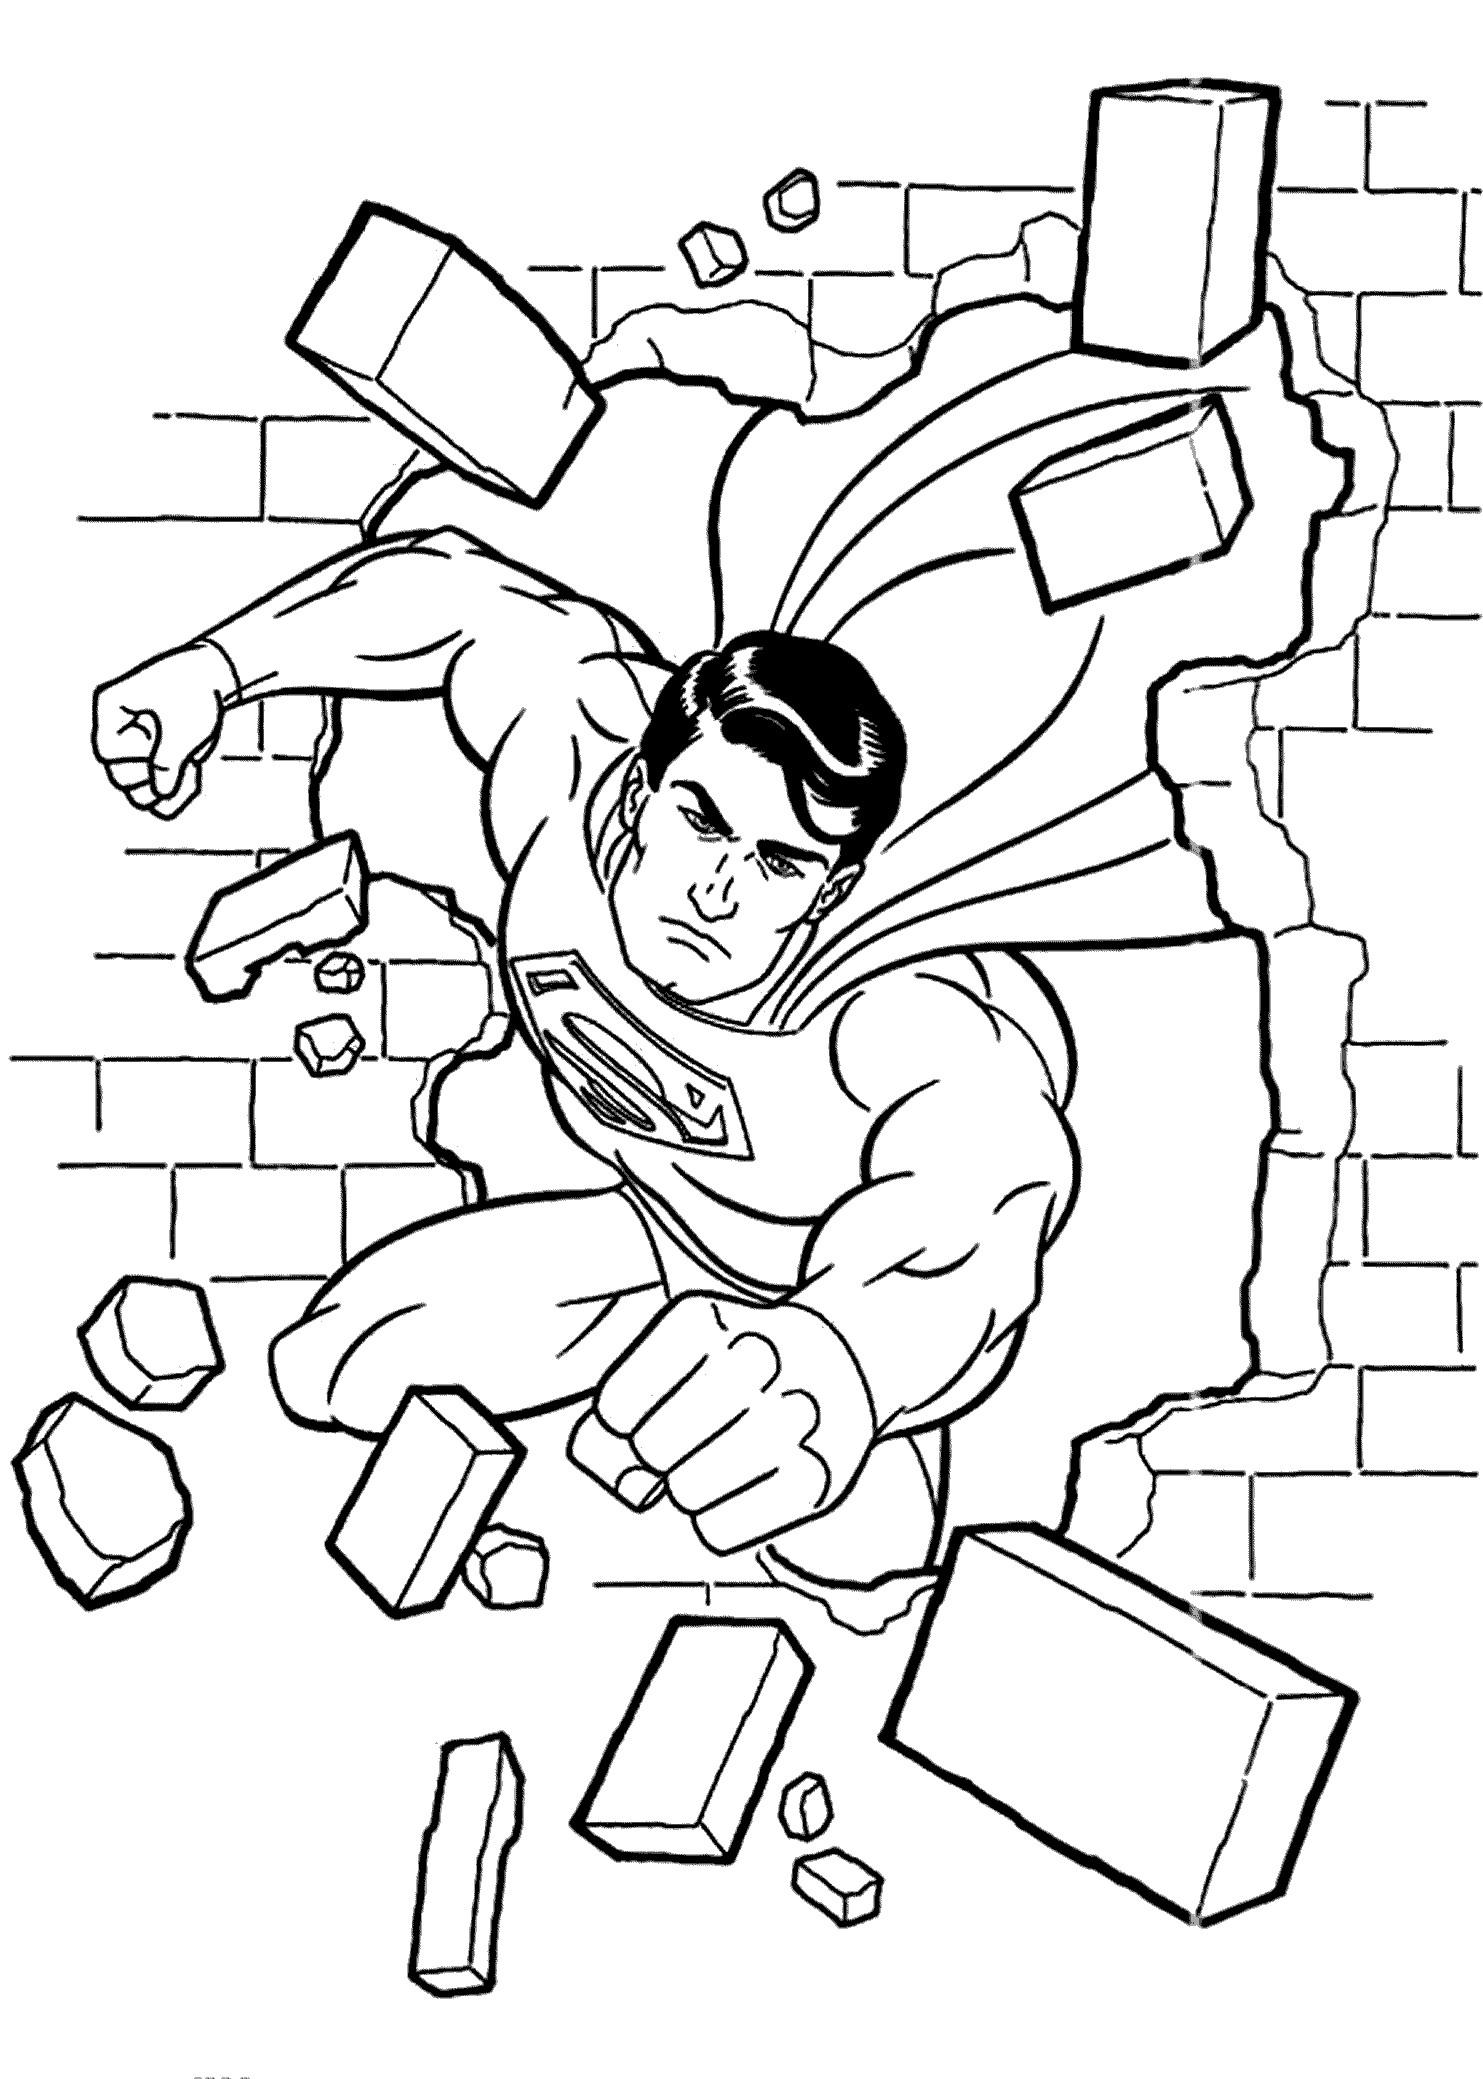 Adult Superhero Coloring Book
 superman coloring pages Free